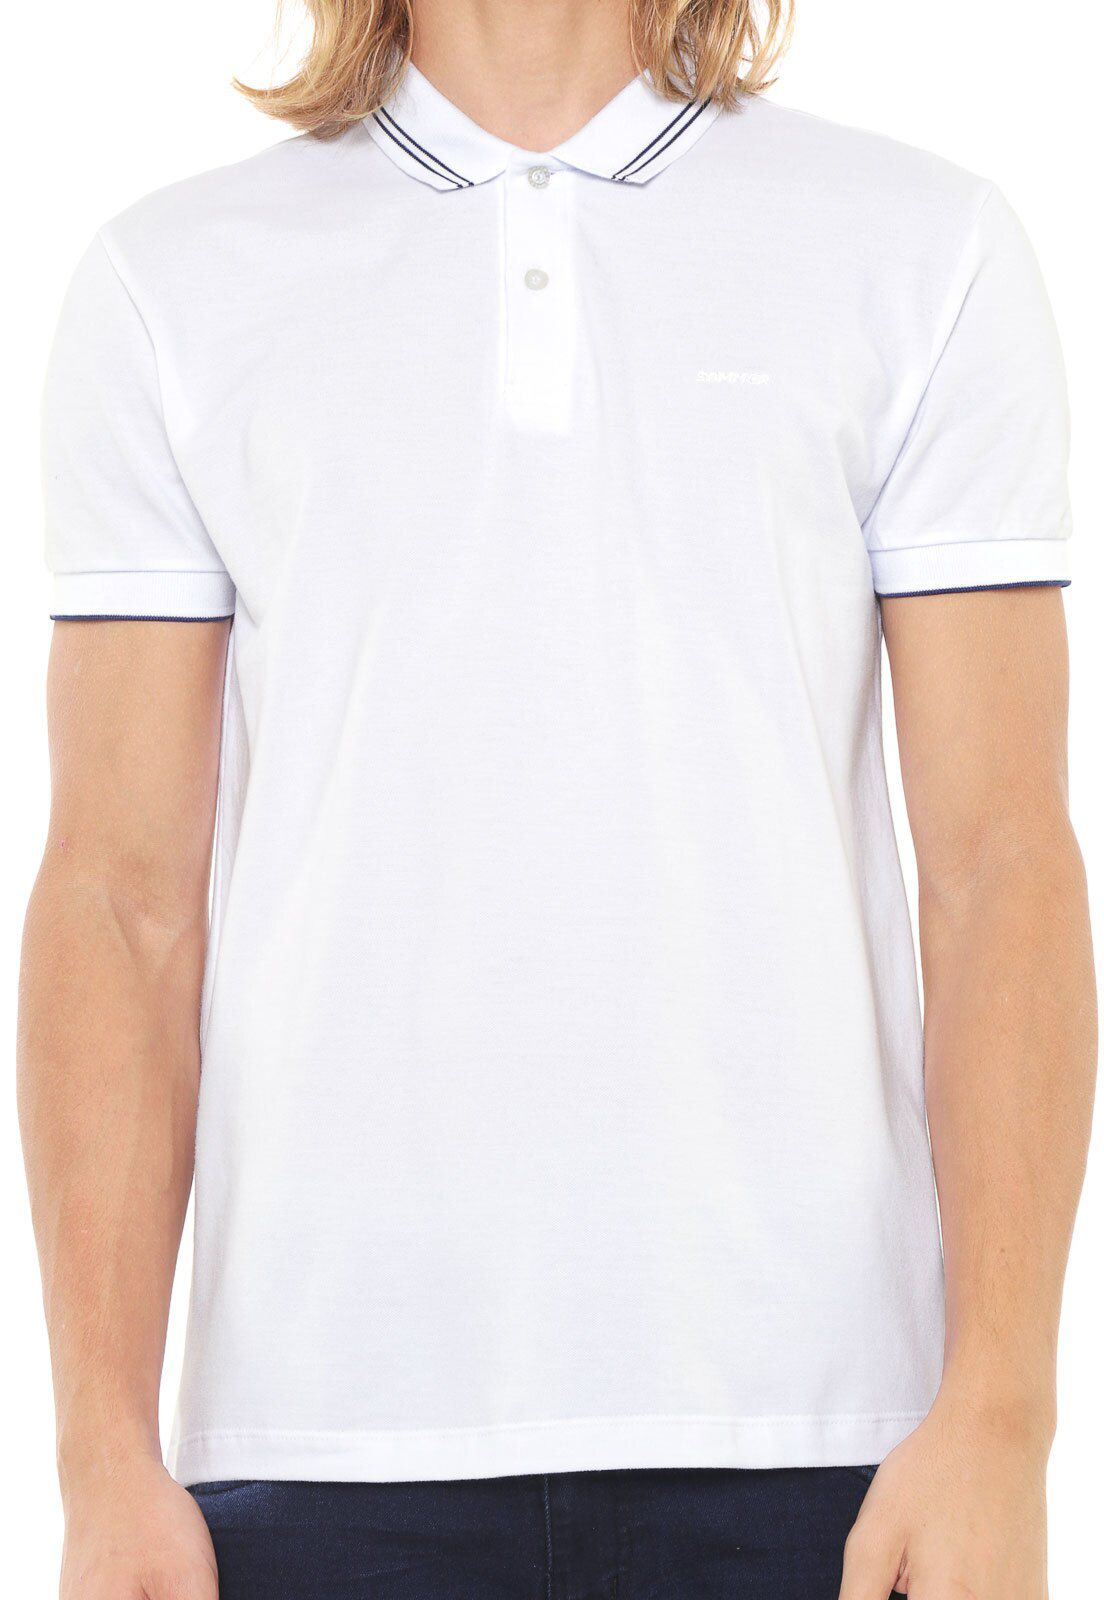 Camisa Polo Sommer Piquet Masculina